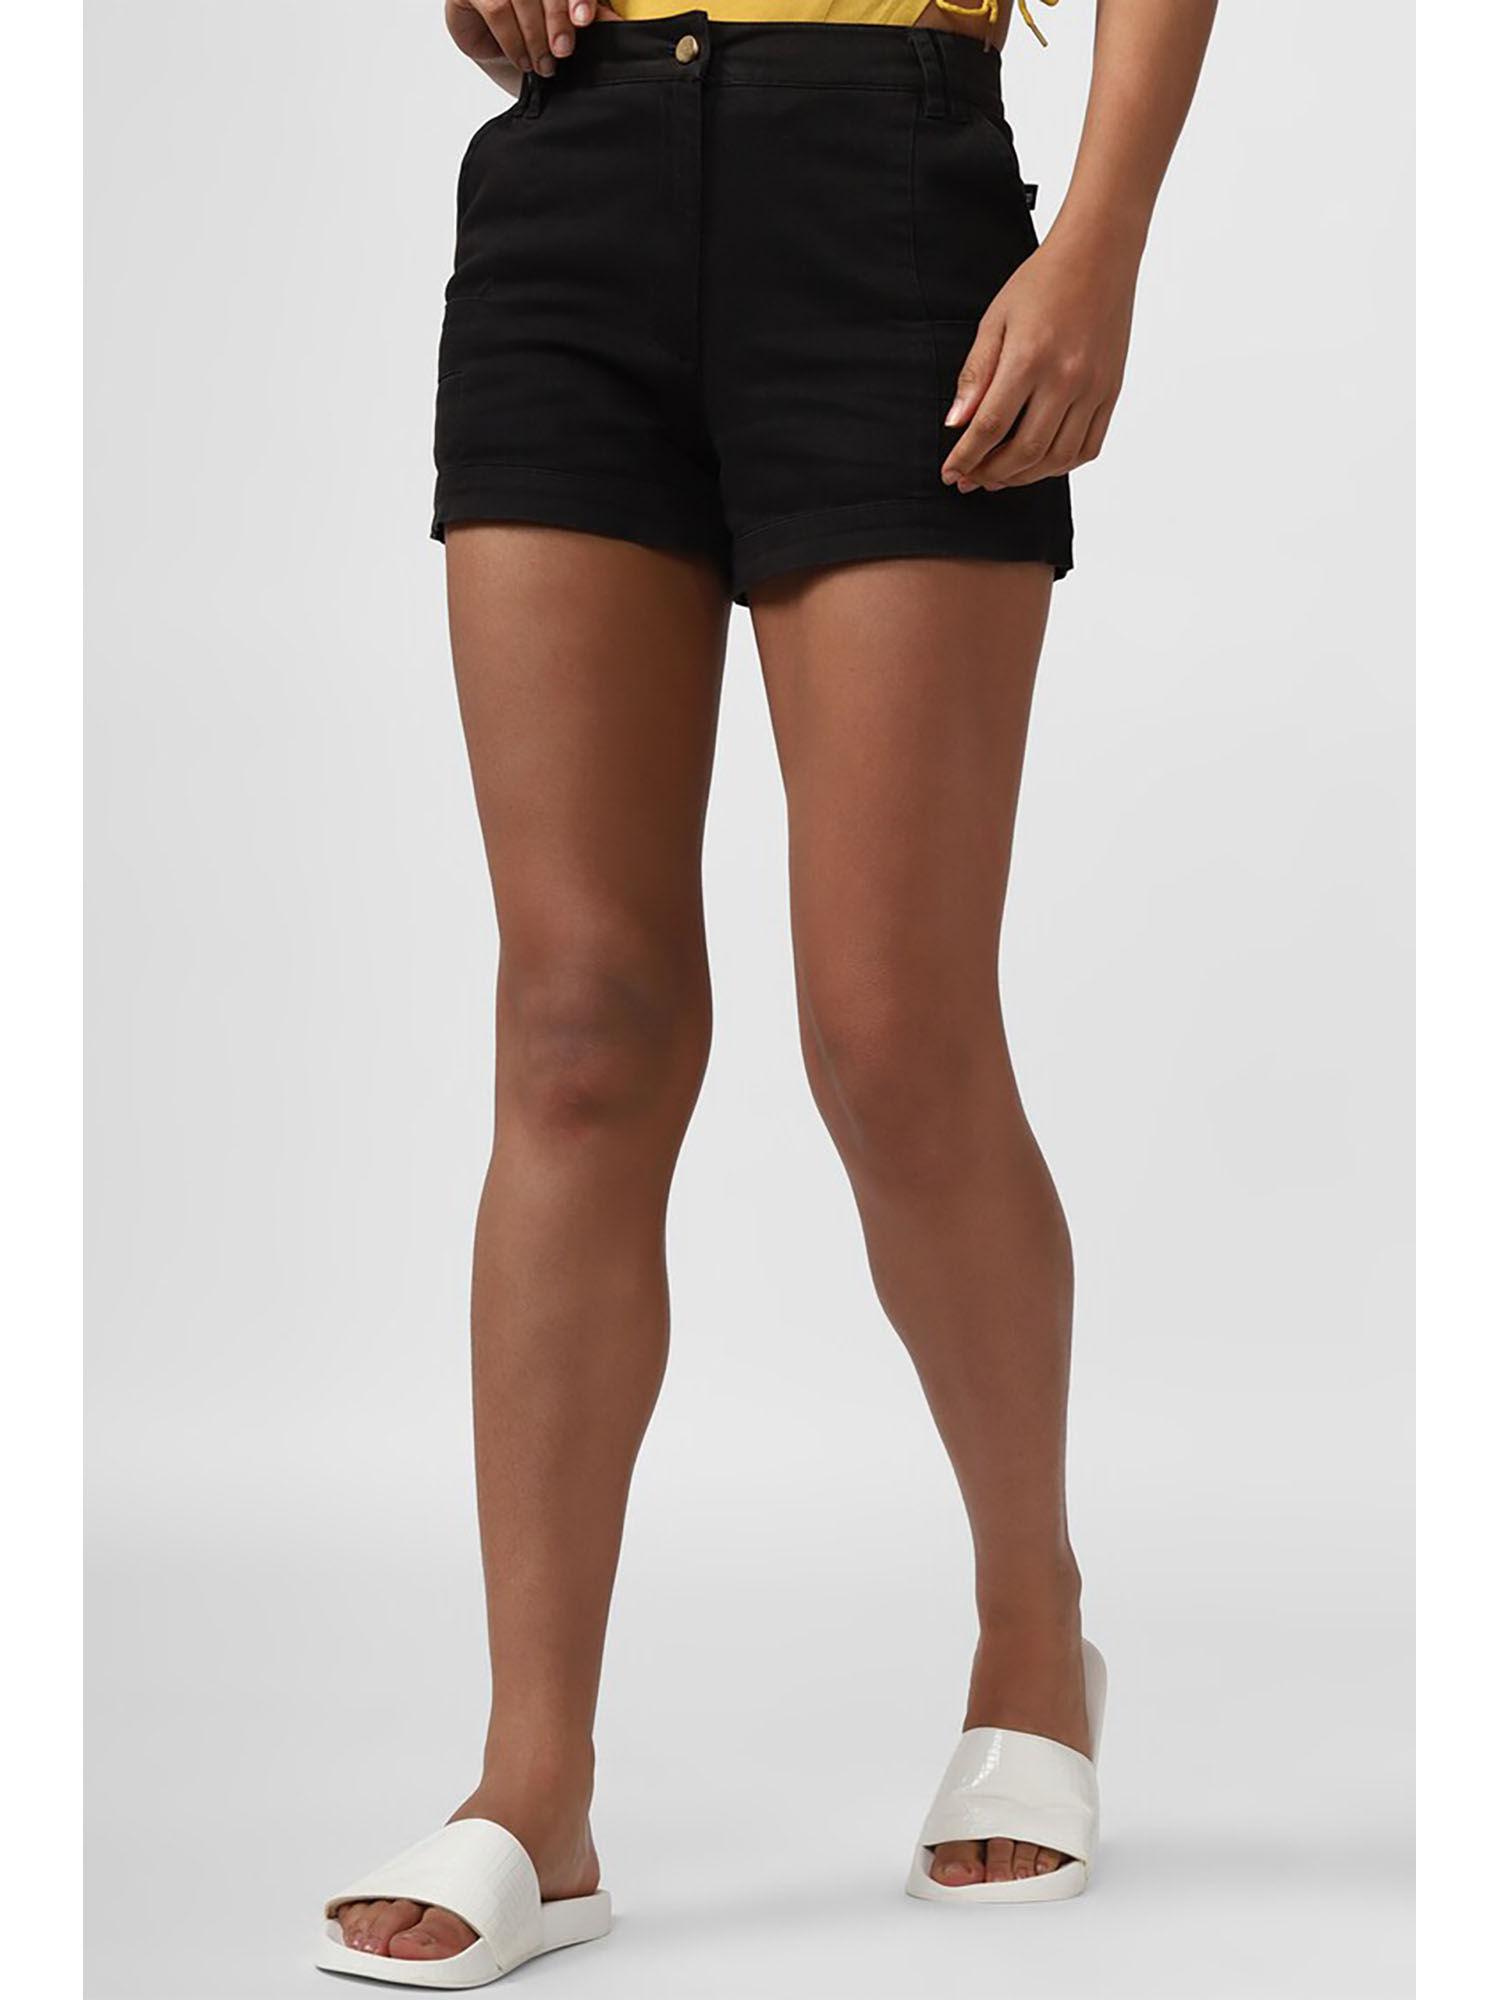 black solid woven shorts